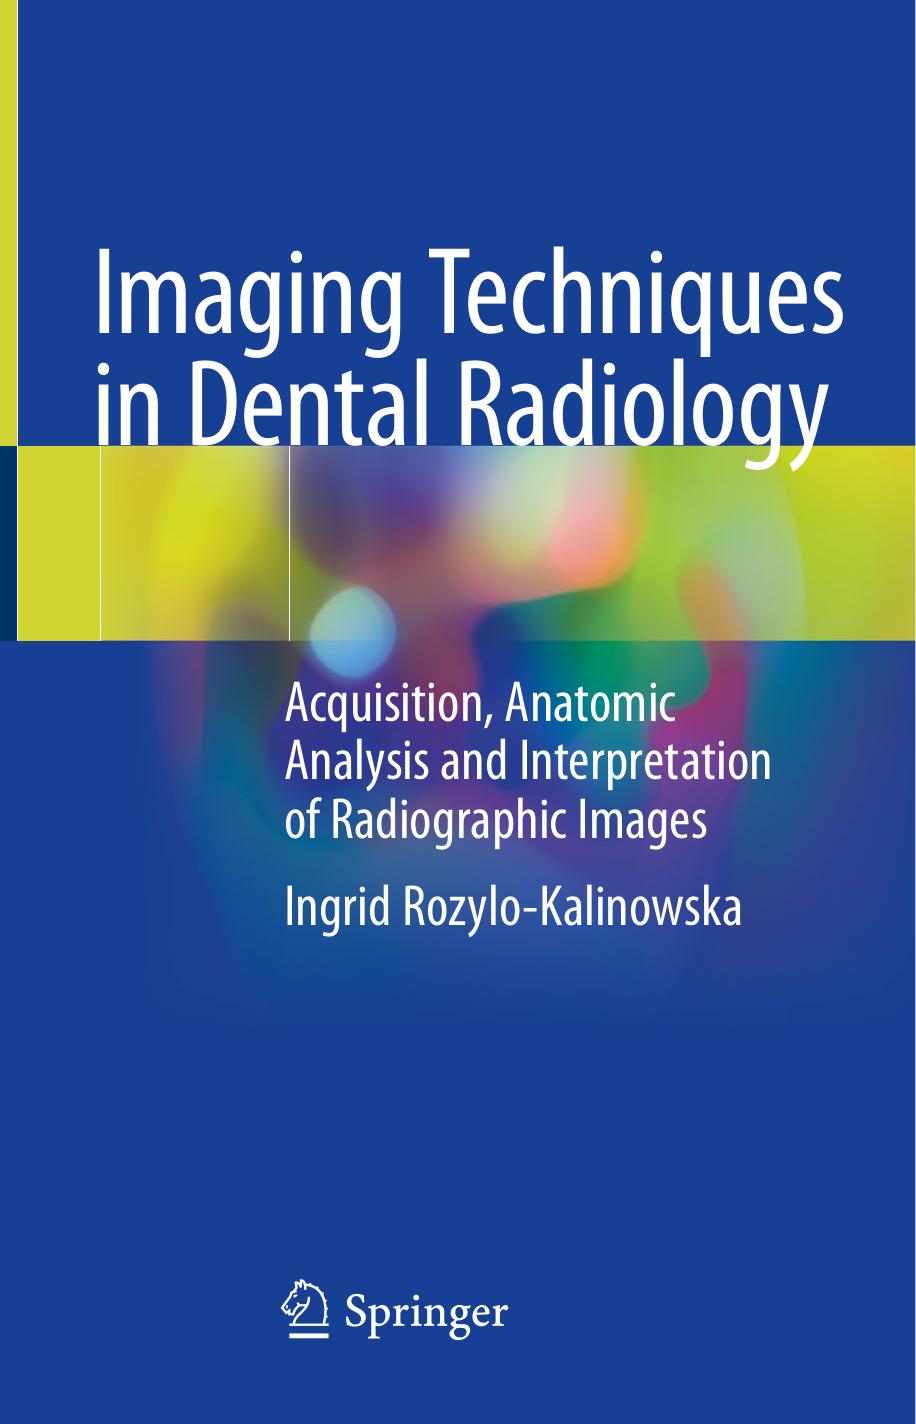 Imaging Techniques in Dental Radiology  Acquisition, Anatomic Analysis and Interpretation of Radiographic Images (2020)